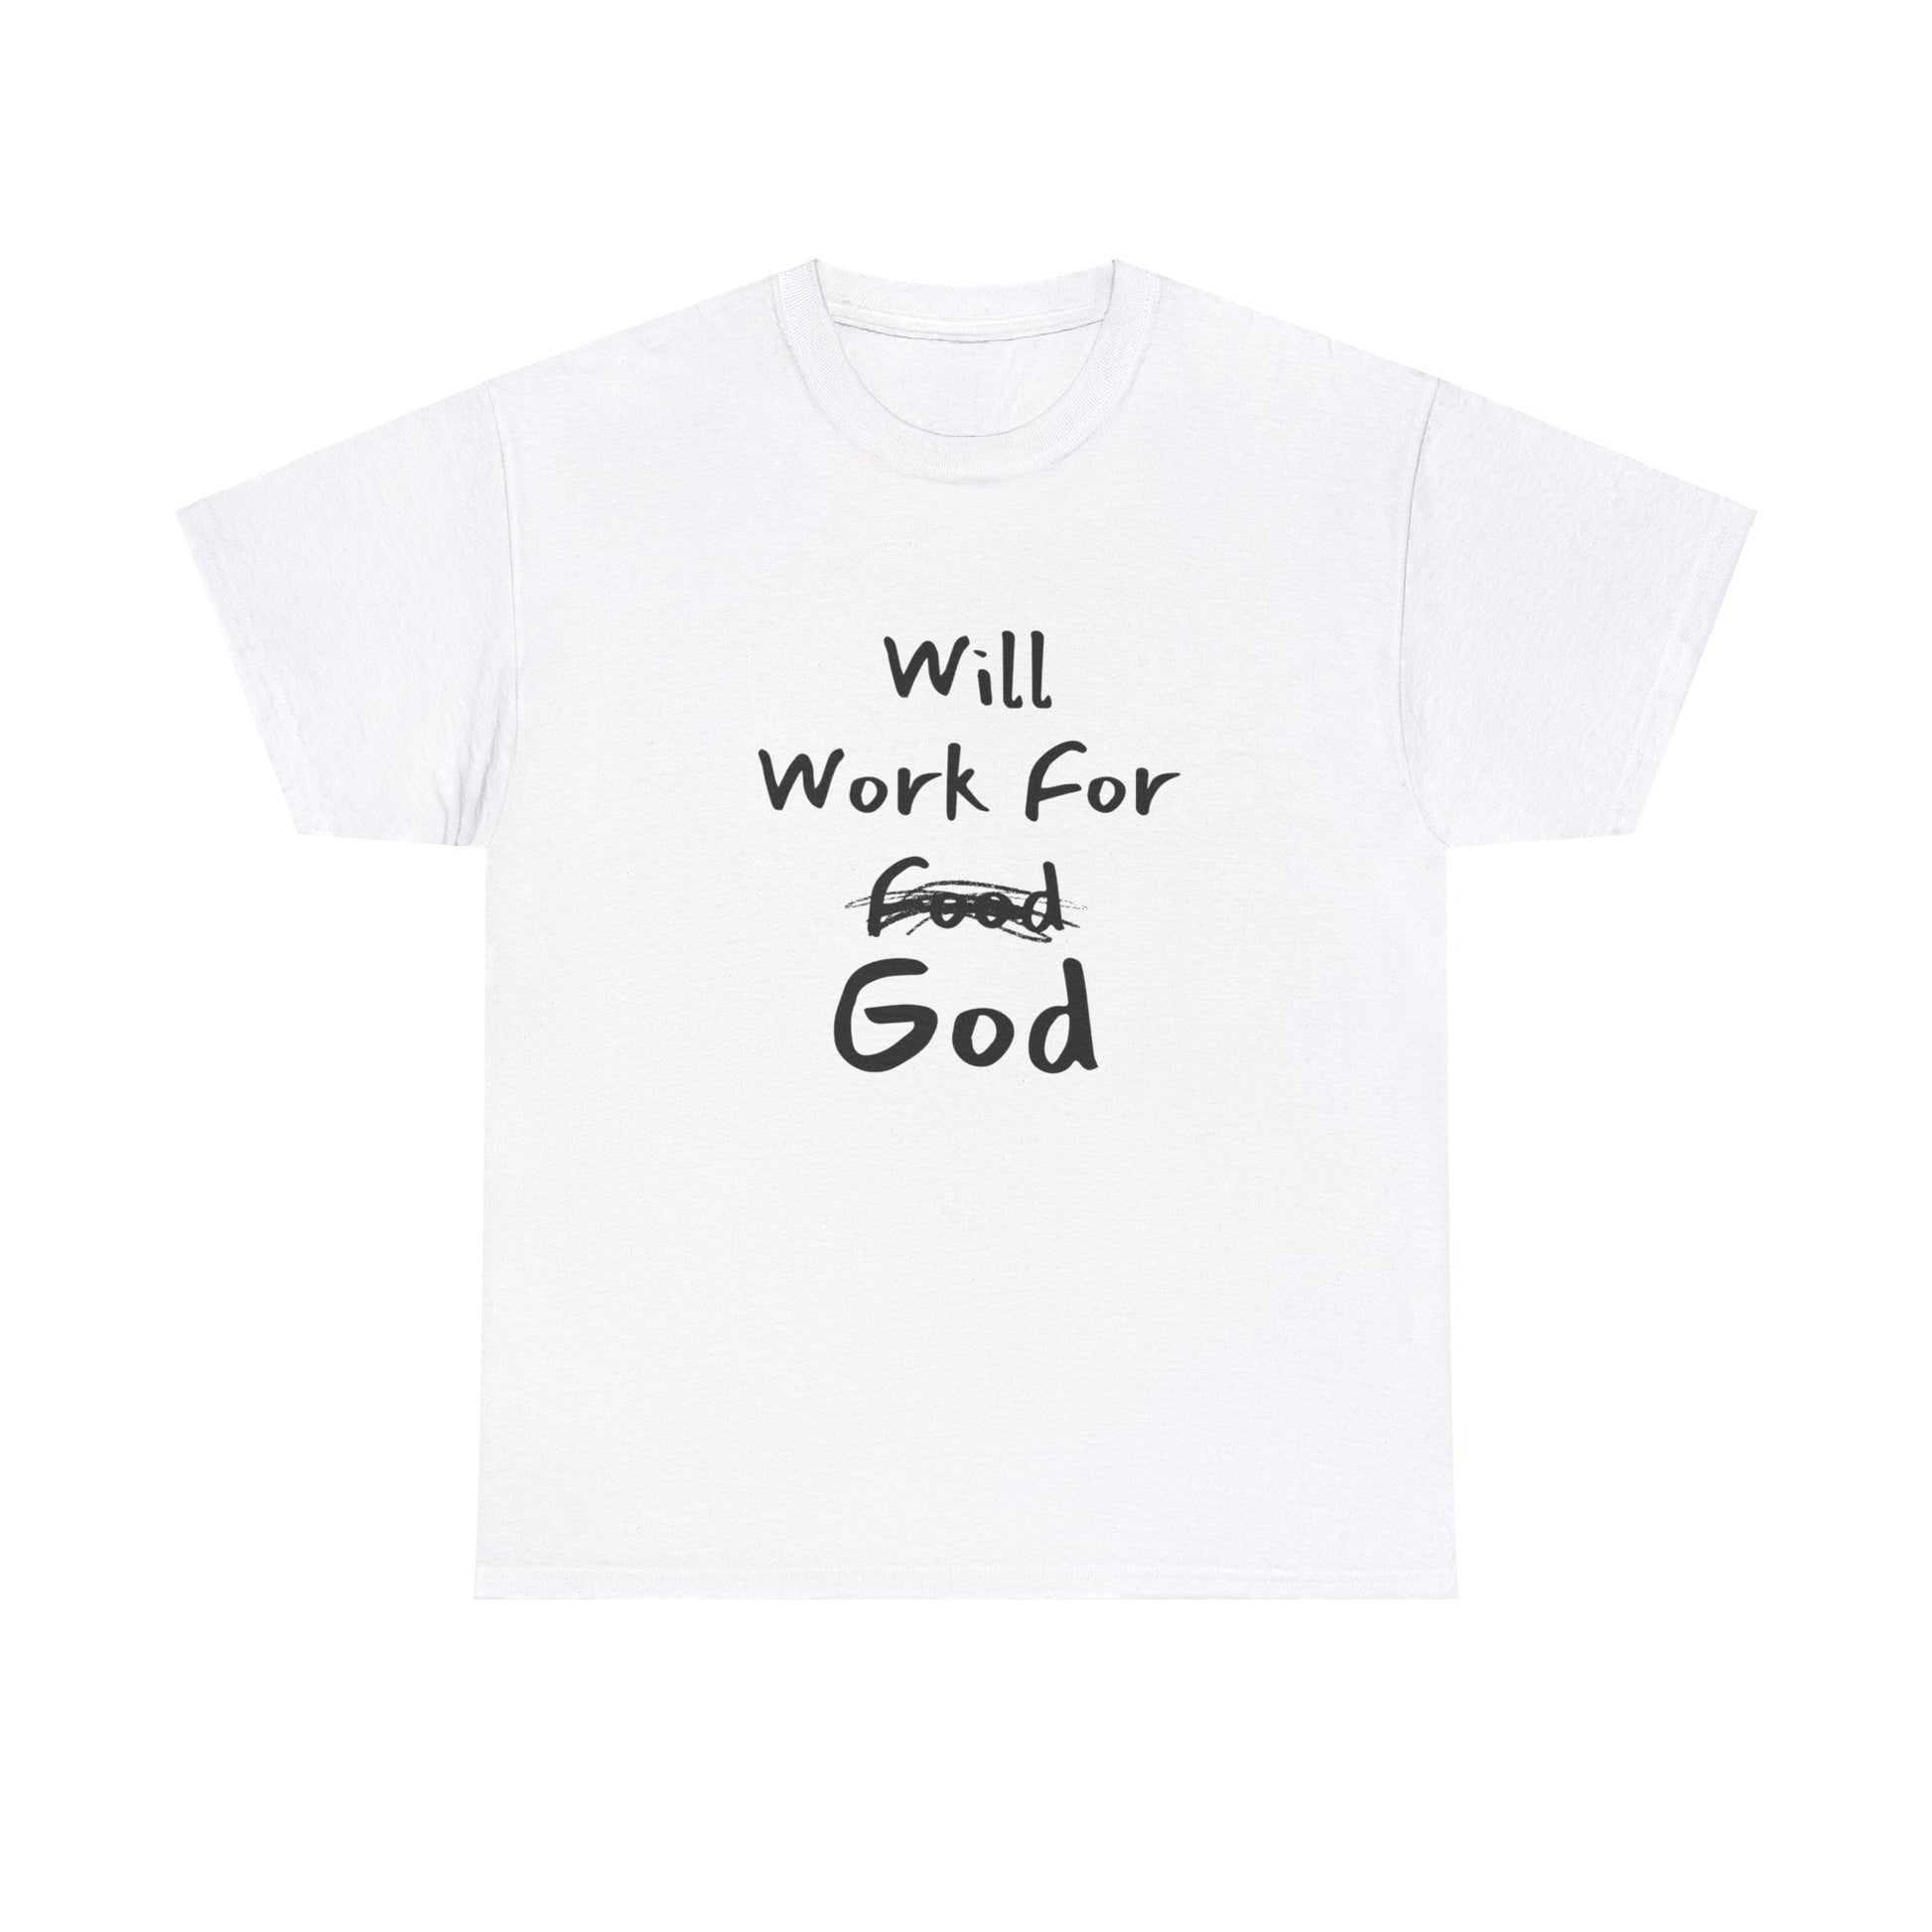 "Unisex cotton tee with Will Work For God Christian message."